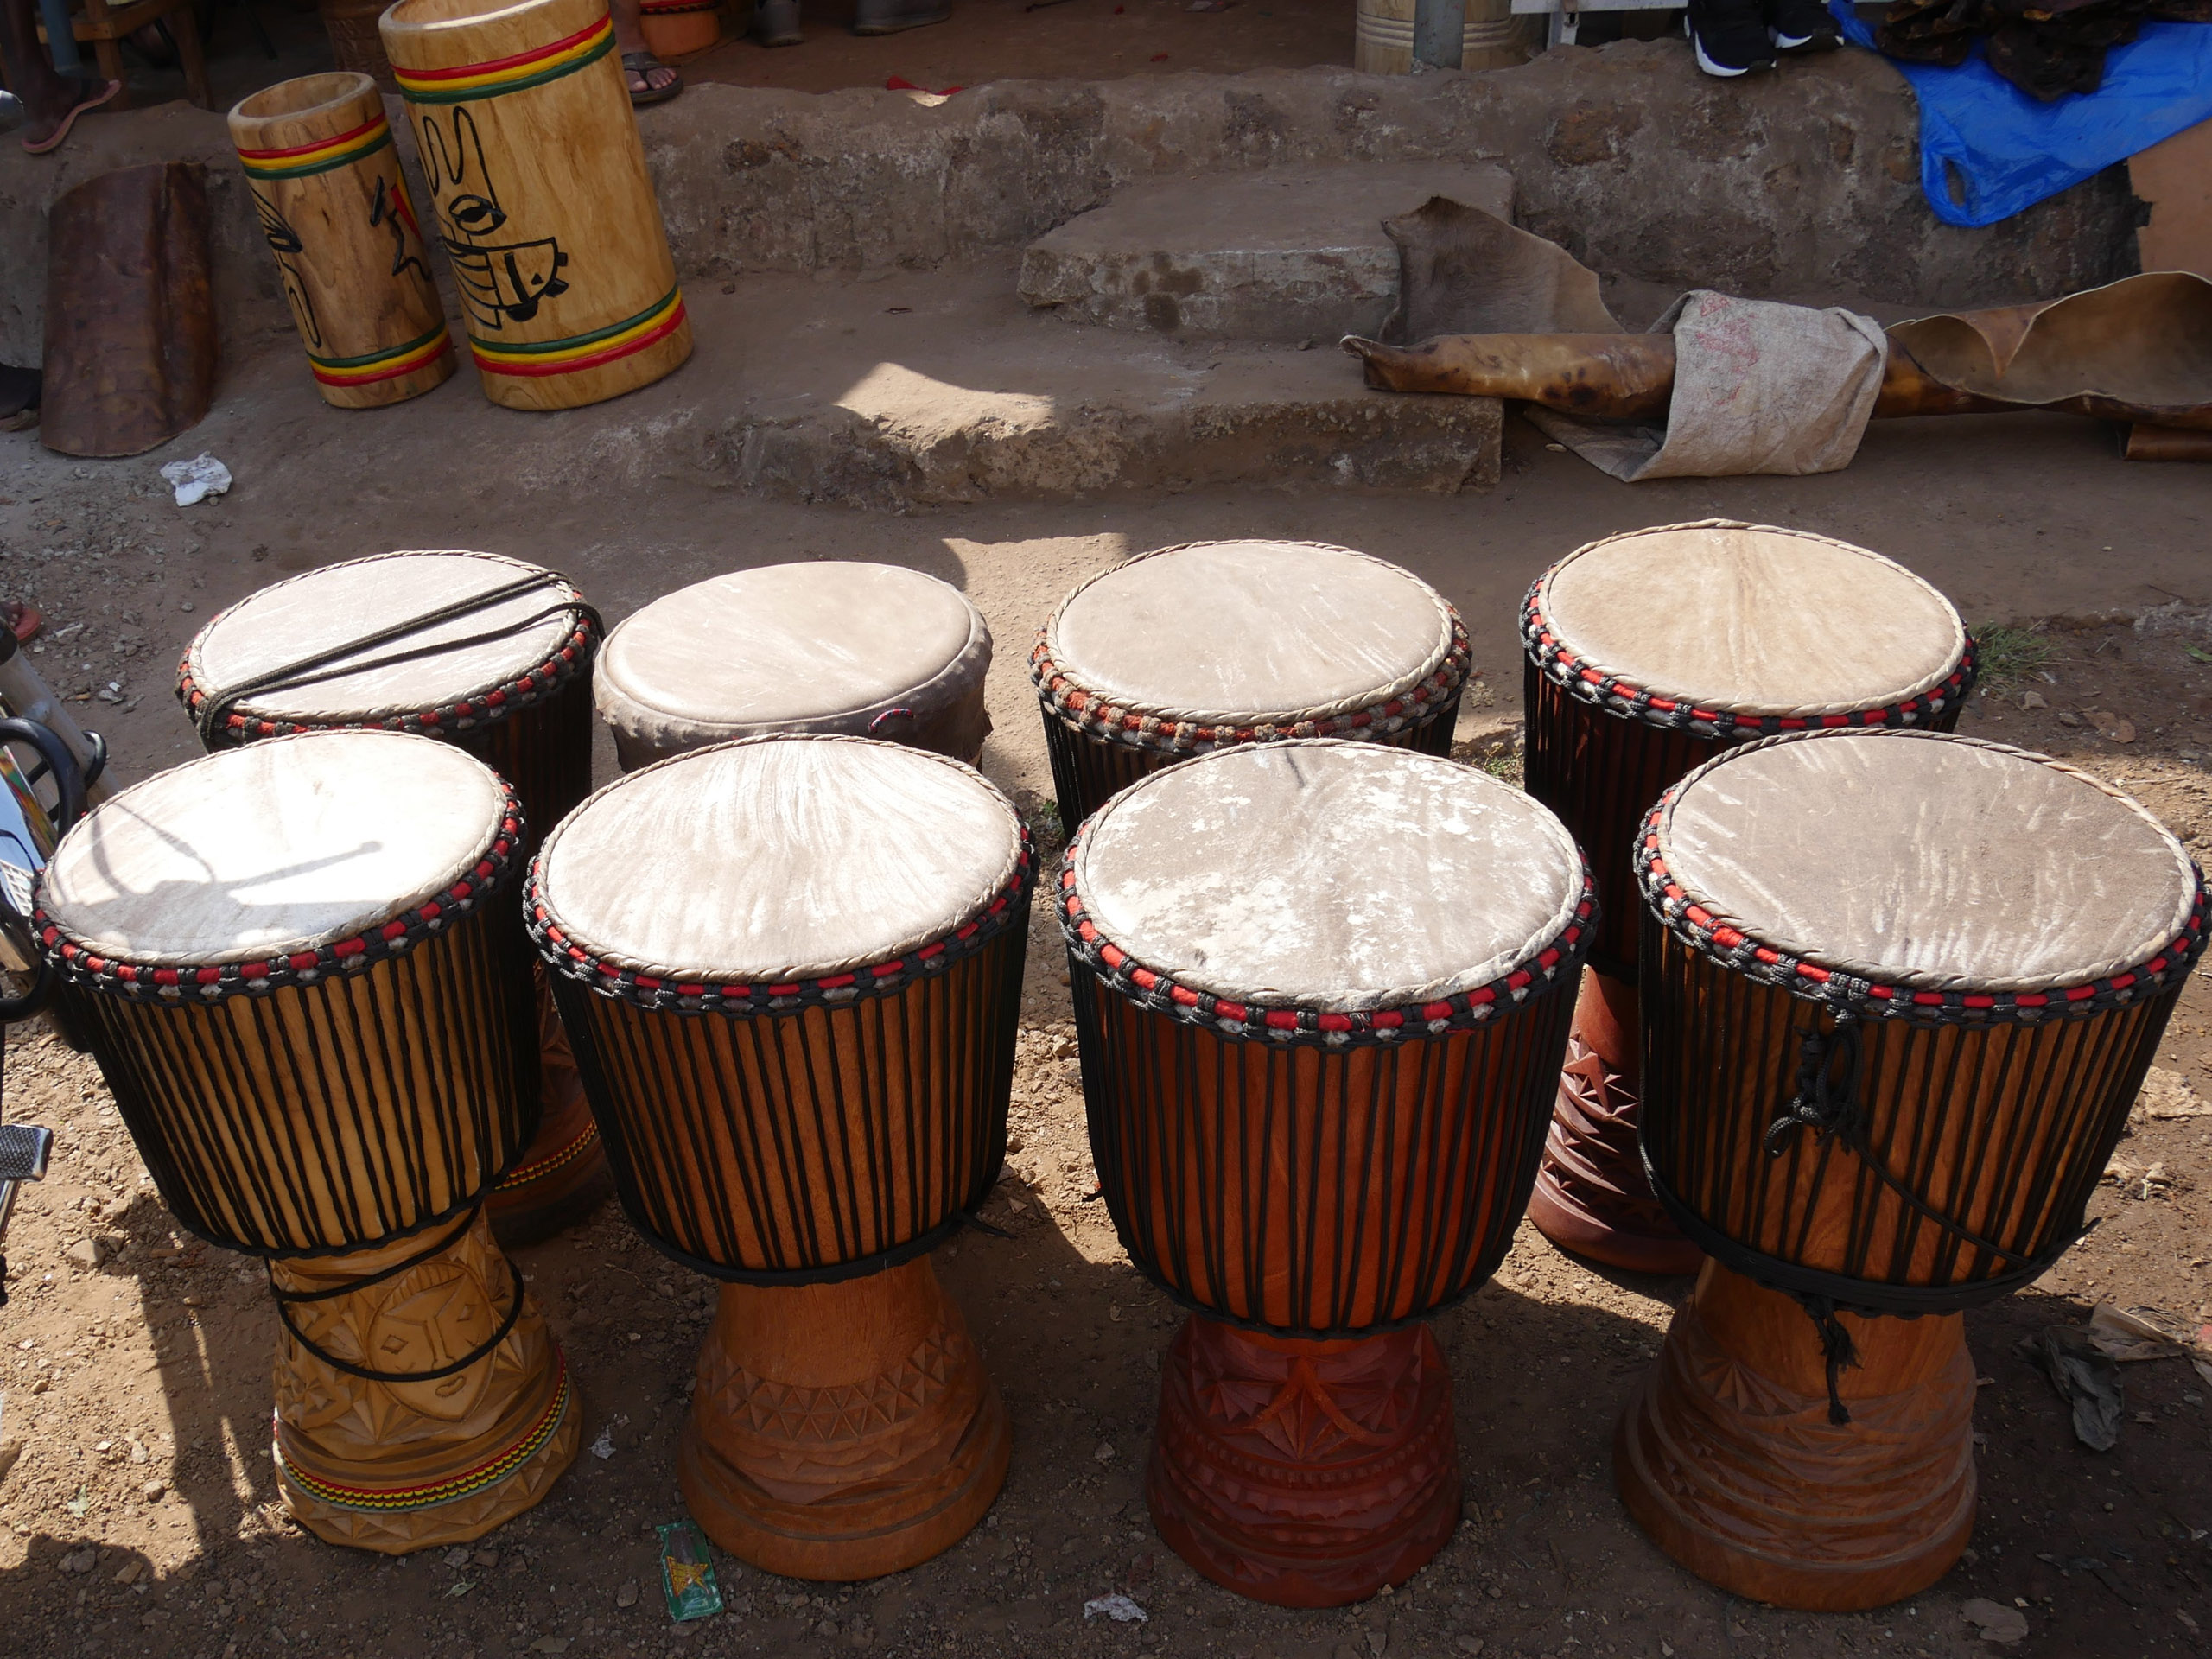 Brand new traditionally hand made Djembes drums sitting outside the shop in Belvedere, Guinea. Belvedere is one of the town's within Conakry, the country's capital.